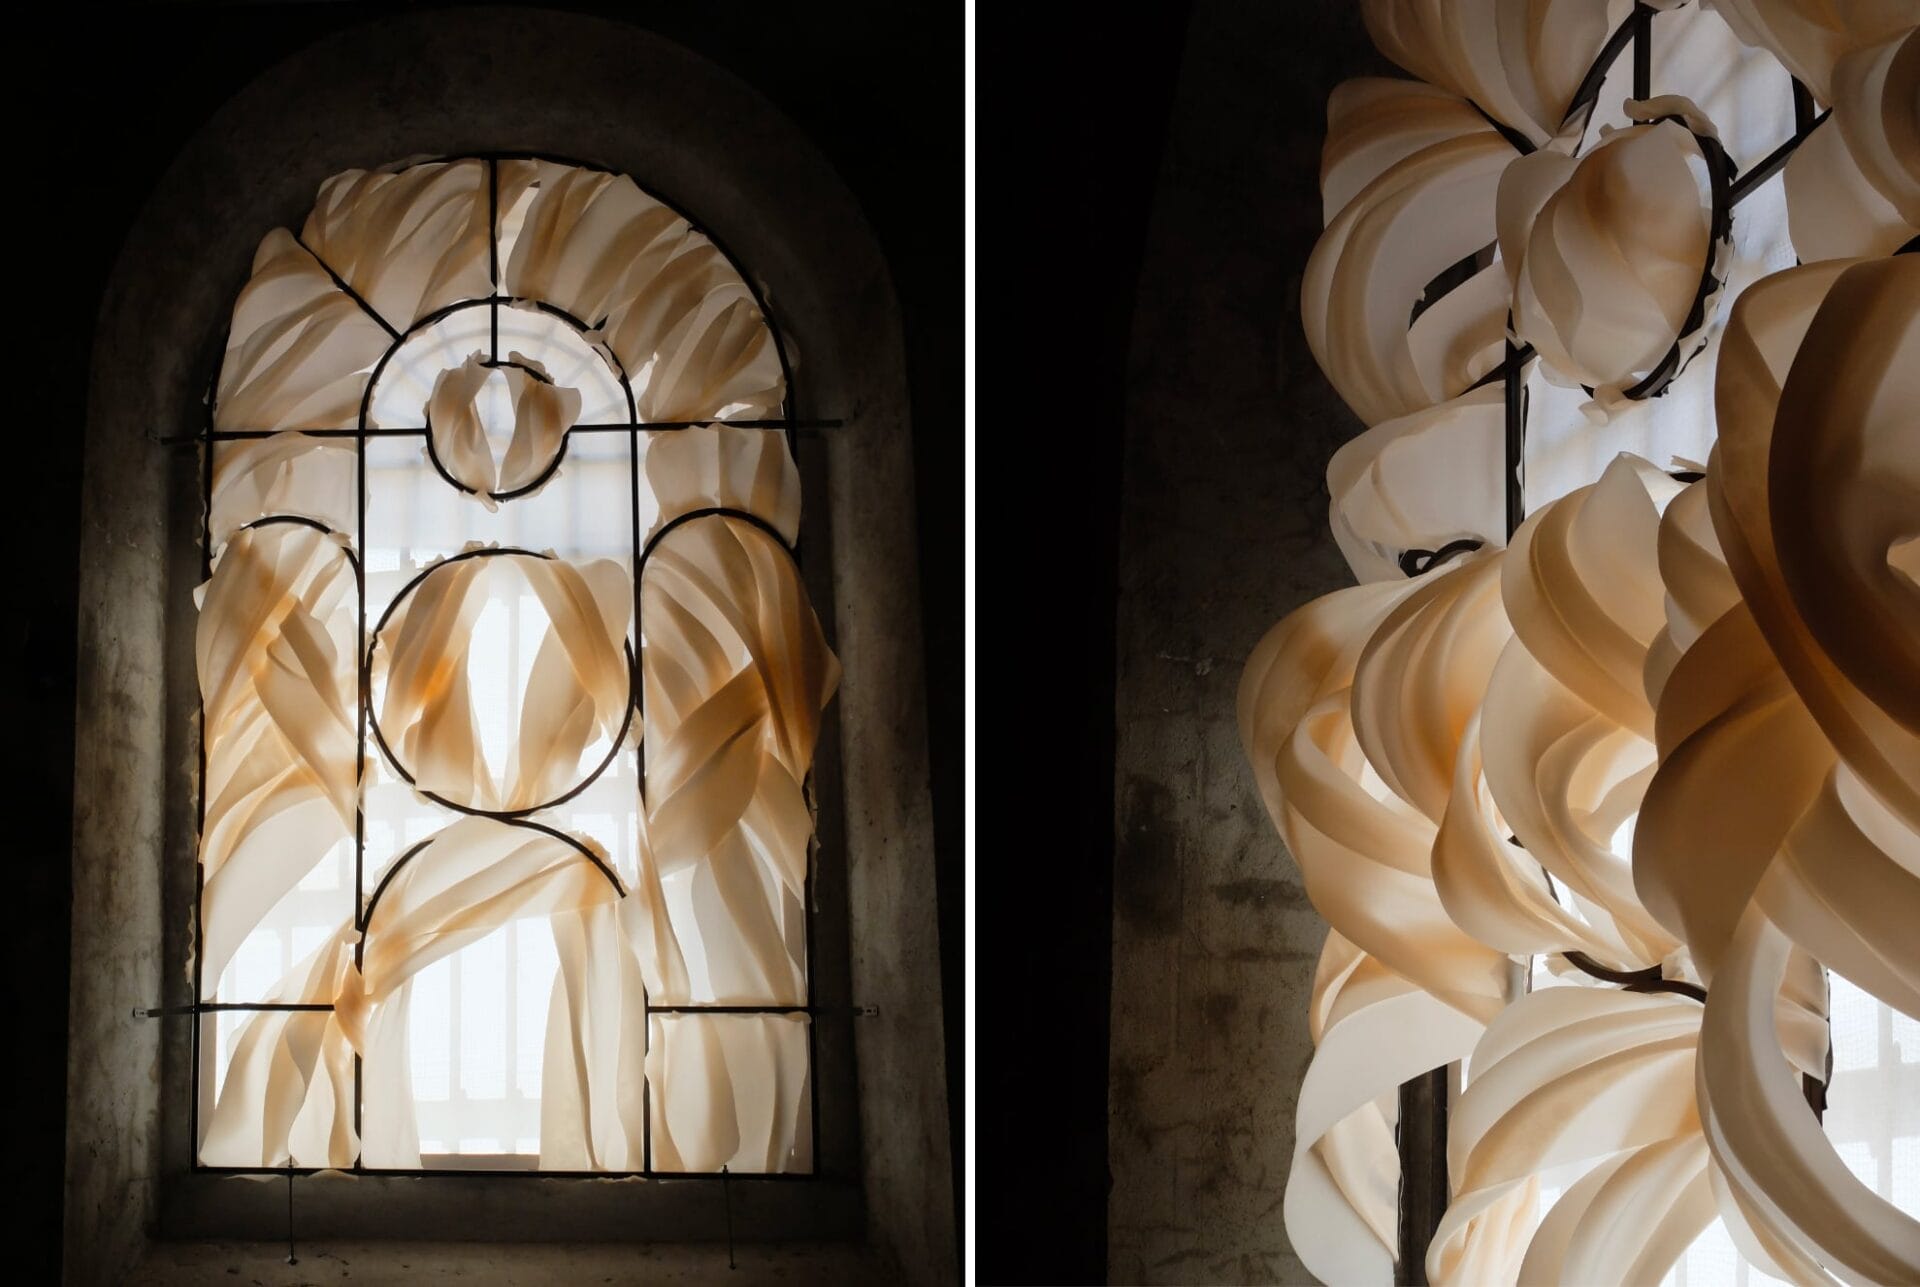 left: thin wax sheets drape across an arched window. right: wax sheets appear to billow out from a window